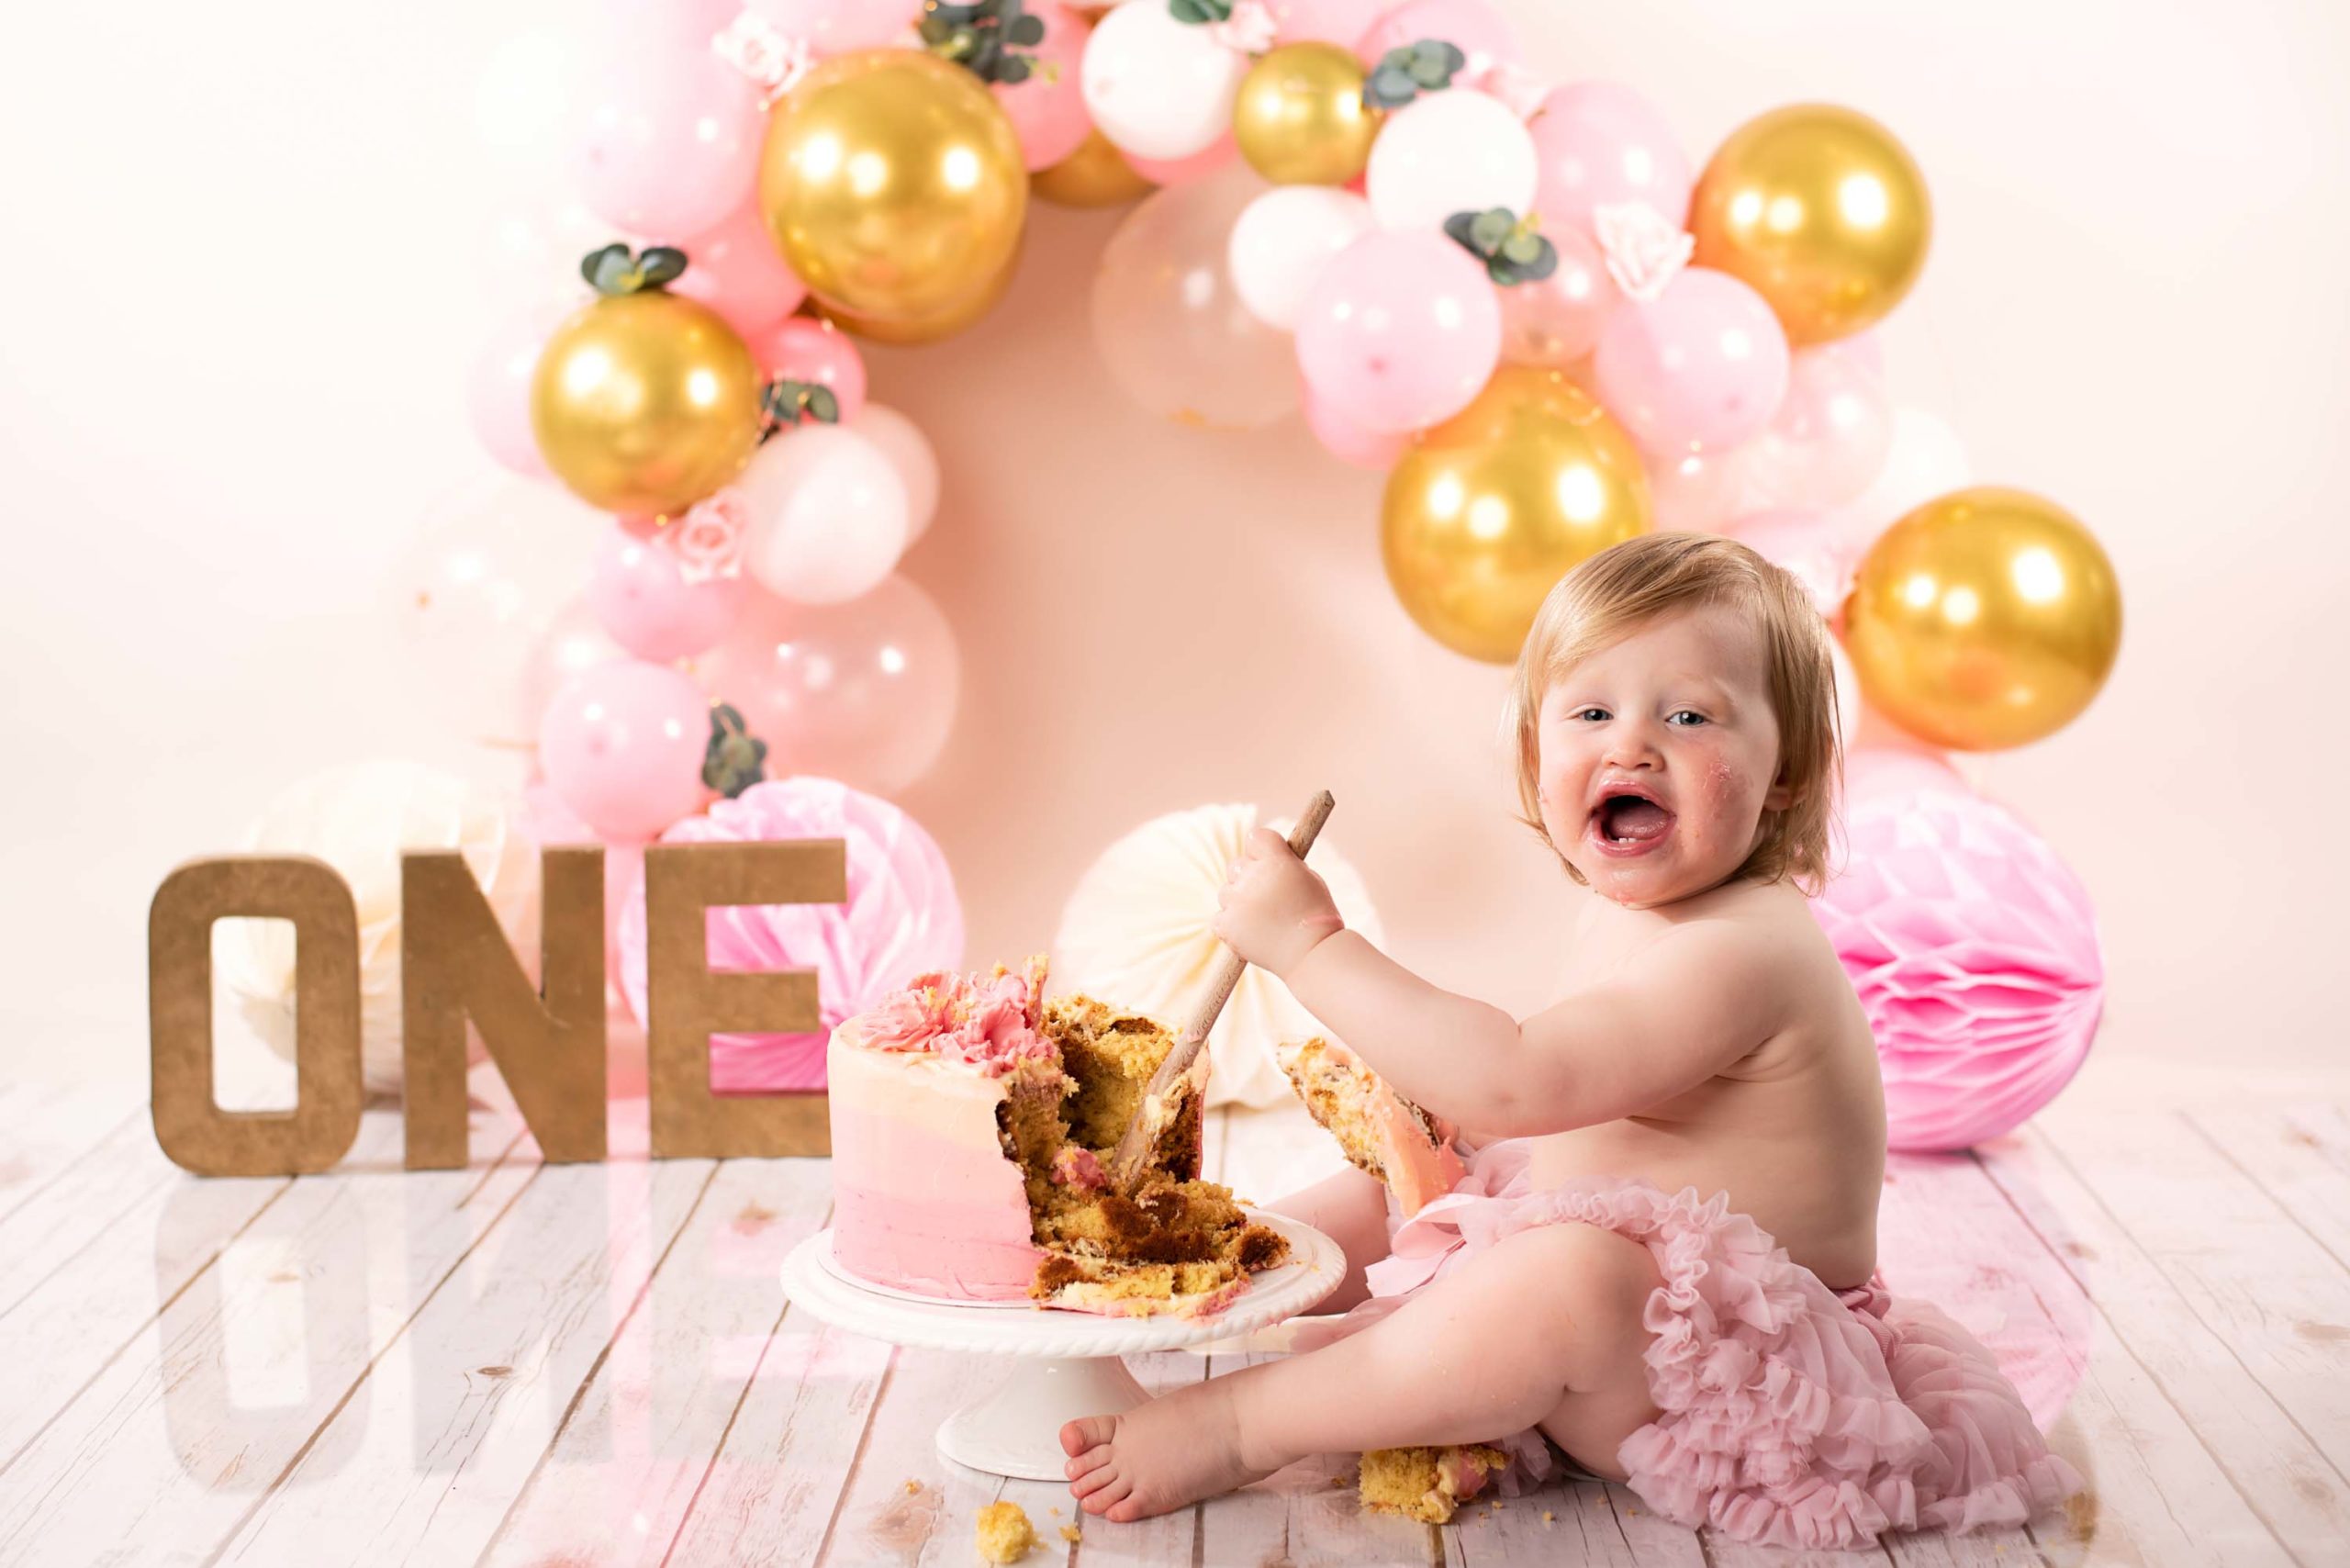 Girl smashing cake with wooden spoon